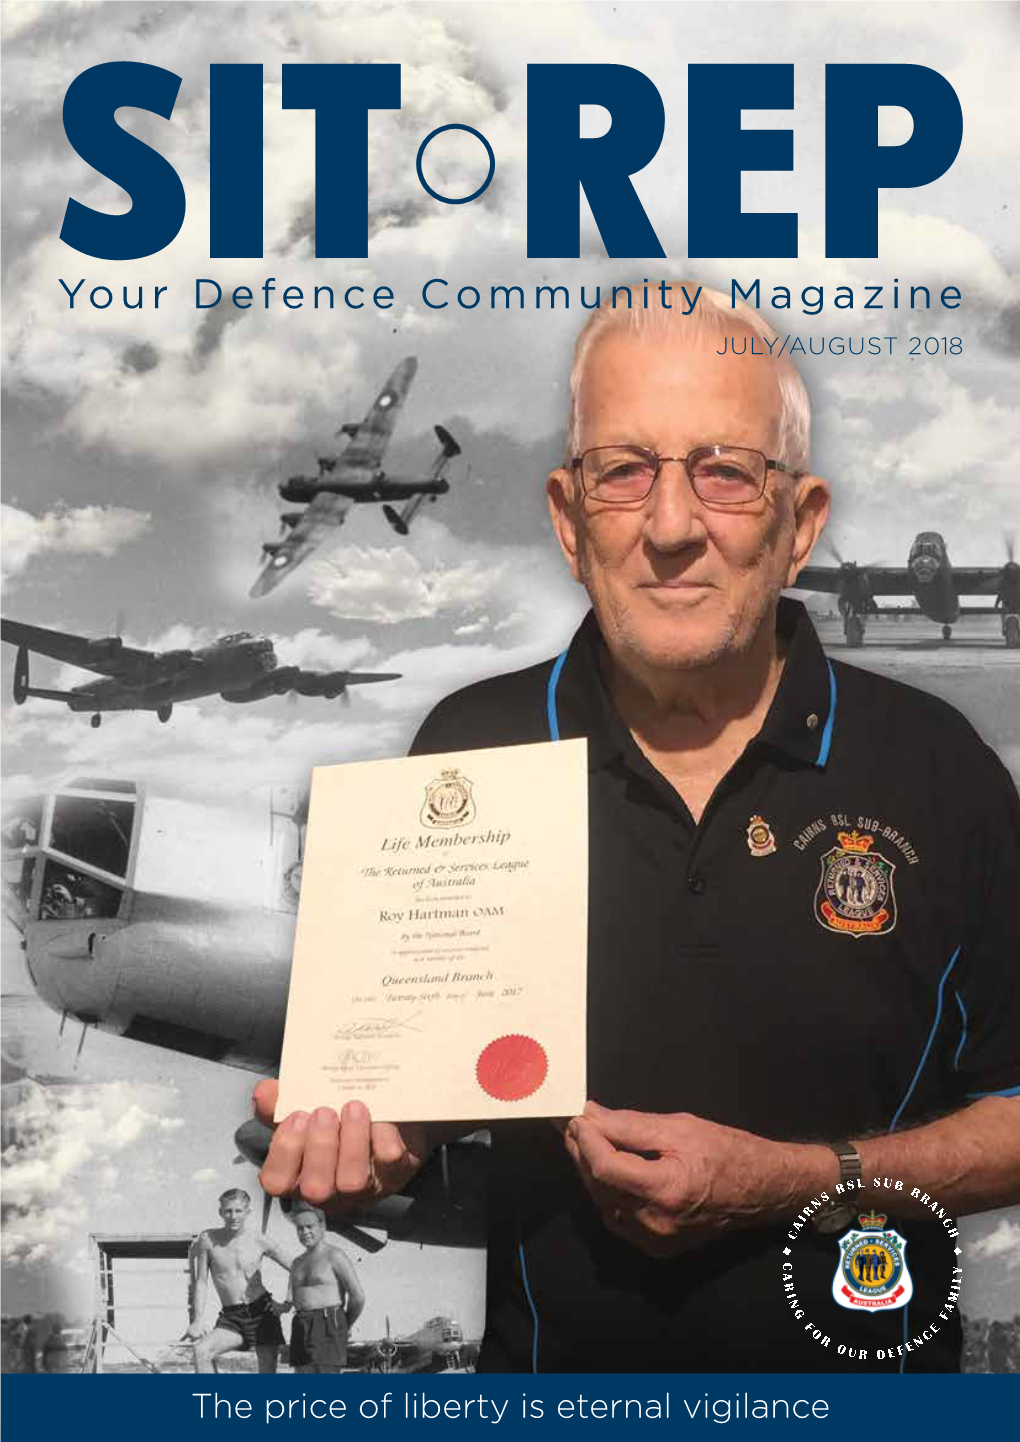 Your Defence Community Magazine JULY/AUGUST 2018